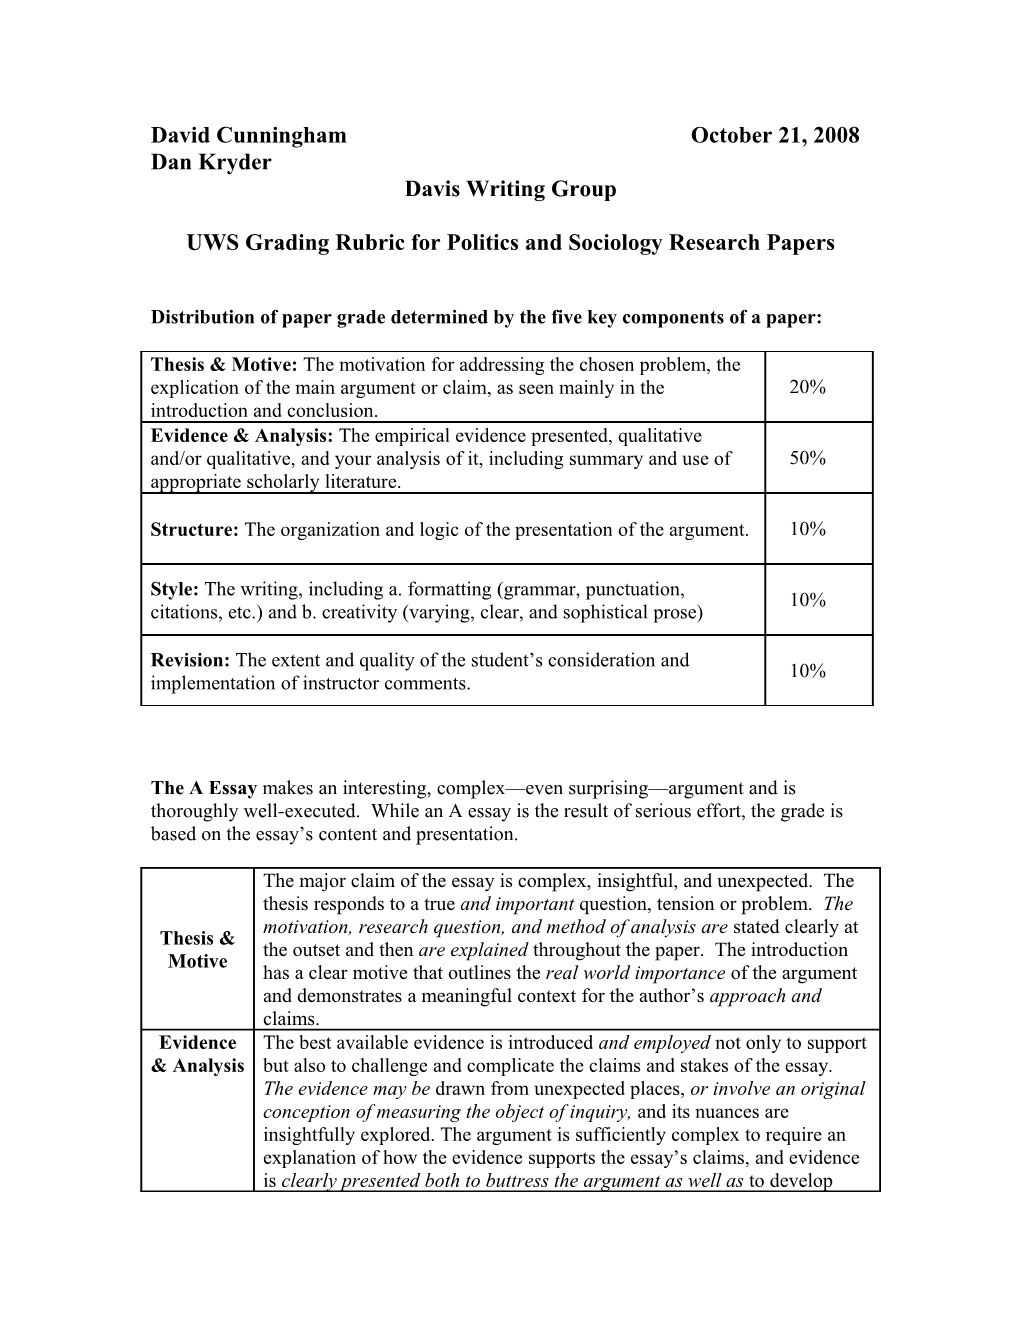 Evaluating Student Writing